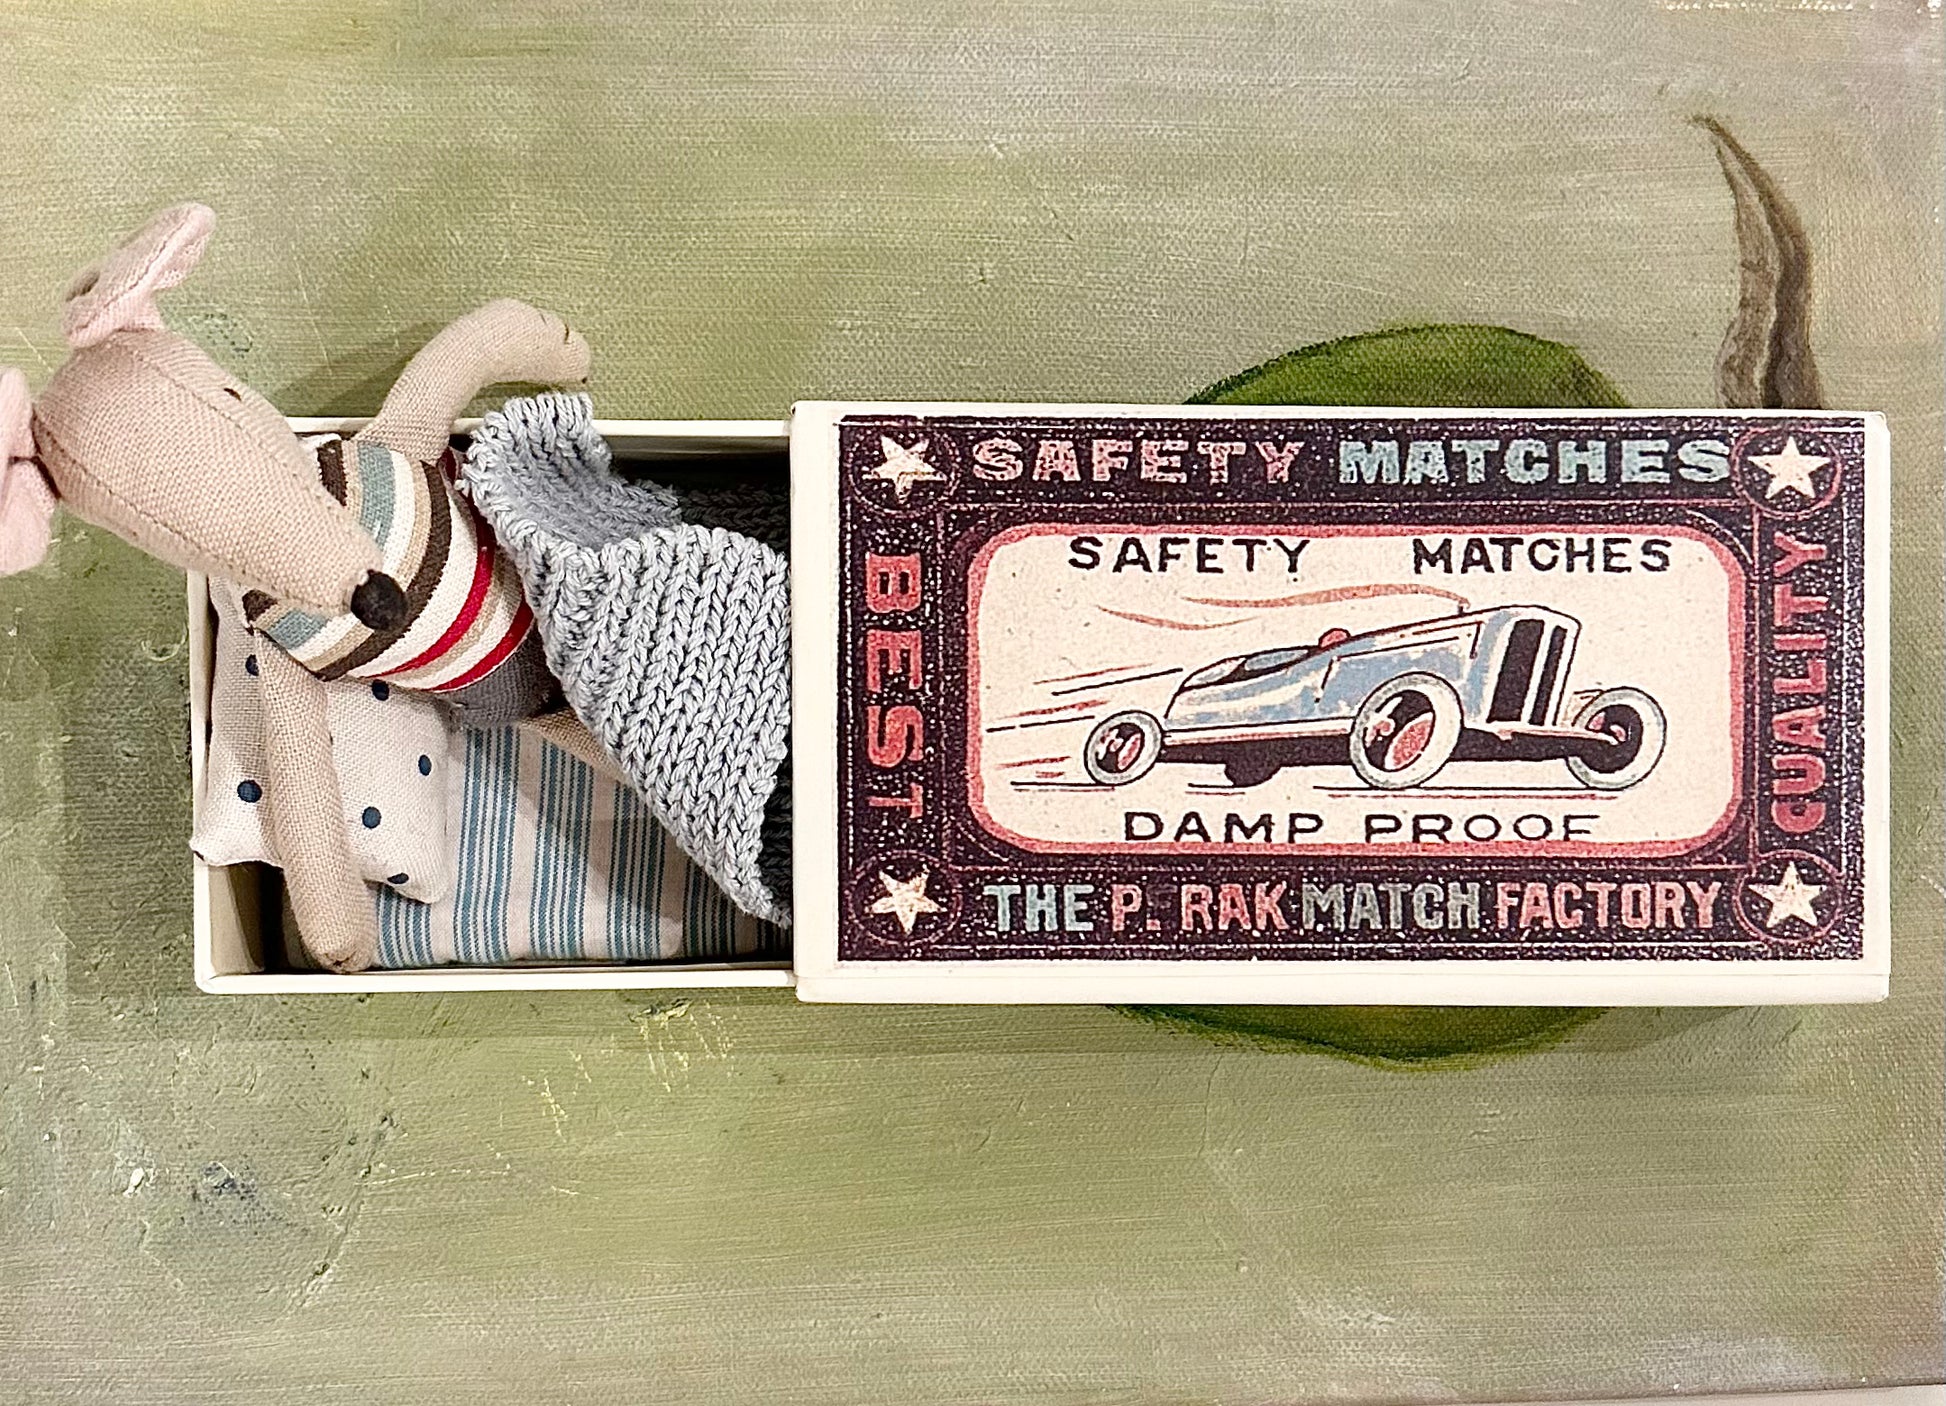 Small Mouse in Matchbox - 2010